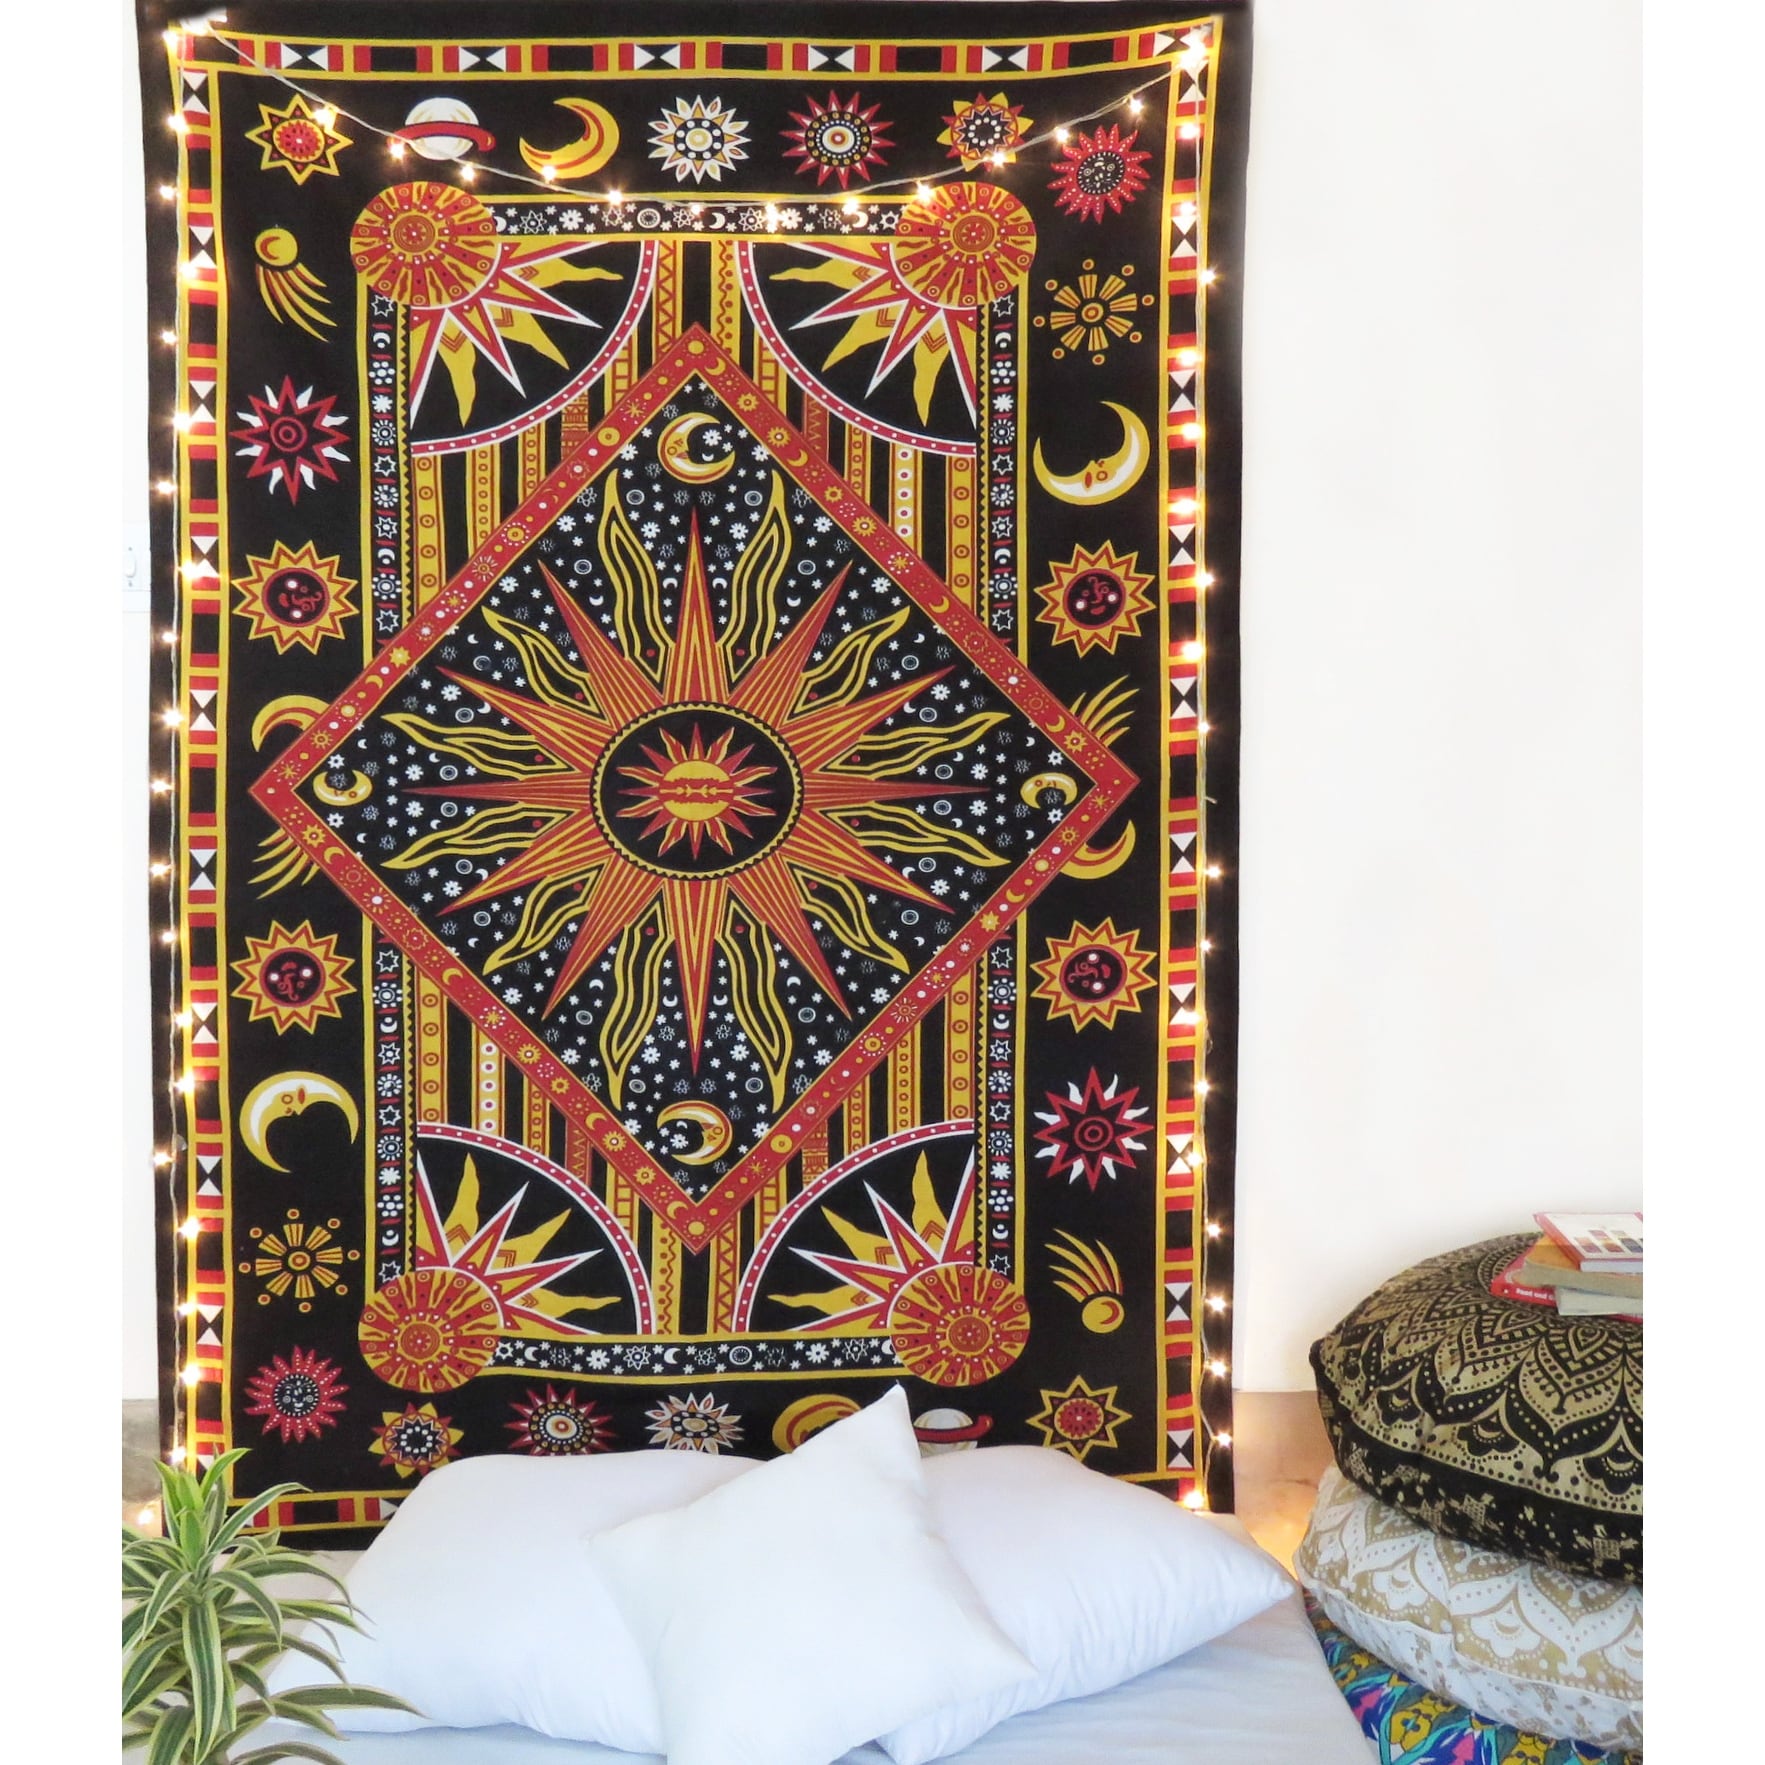 Sun Moon And Stars Hippie Tapestry Wall Hanging Home Decor Blanket Beach Throw 